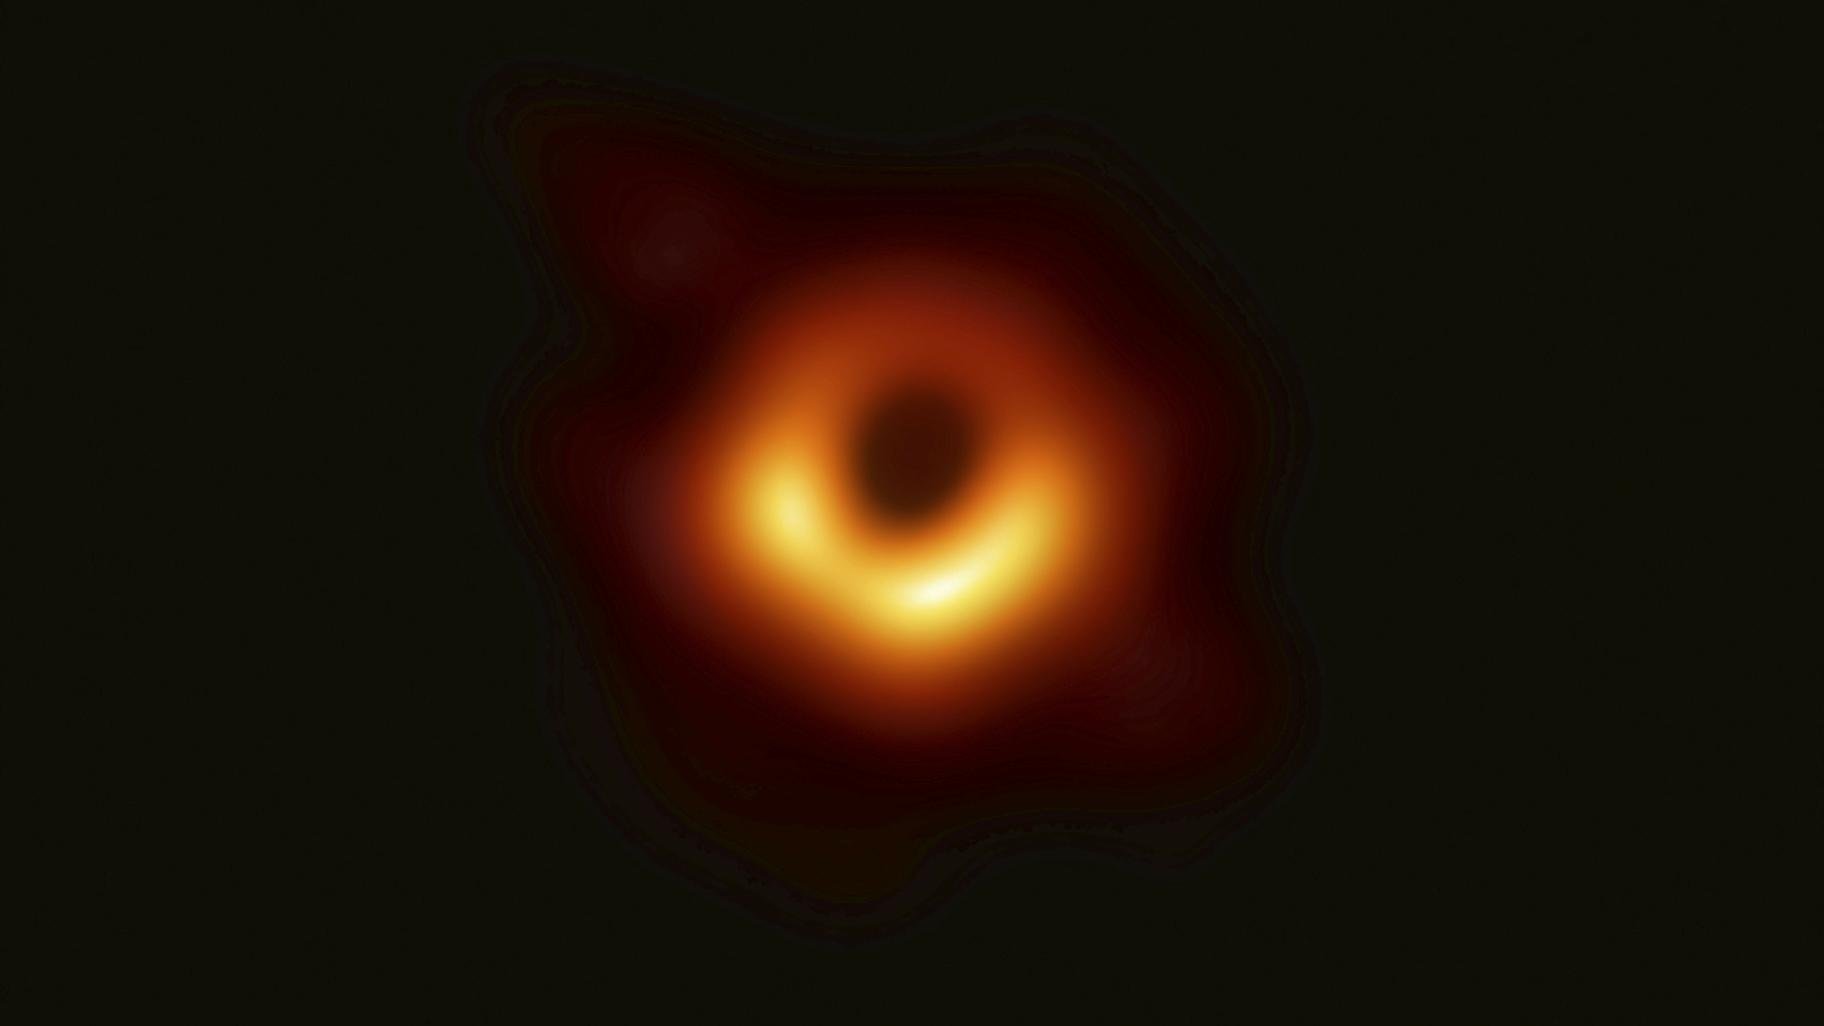 black hole imaged for first time by event horizon telescope